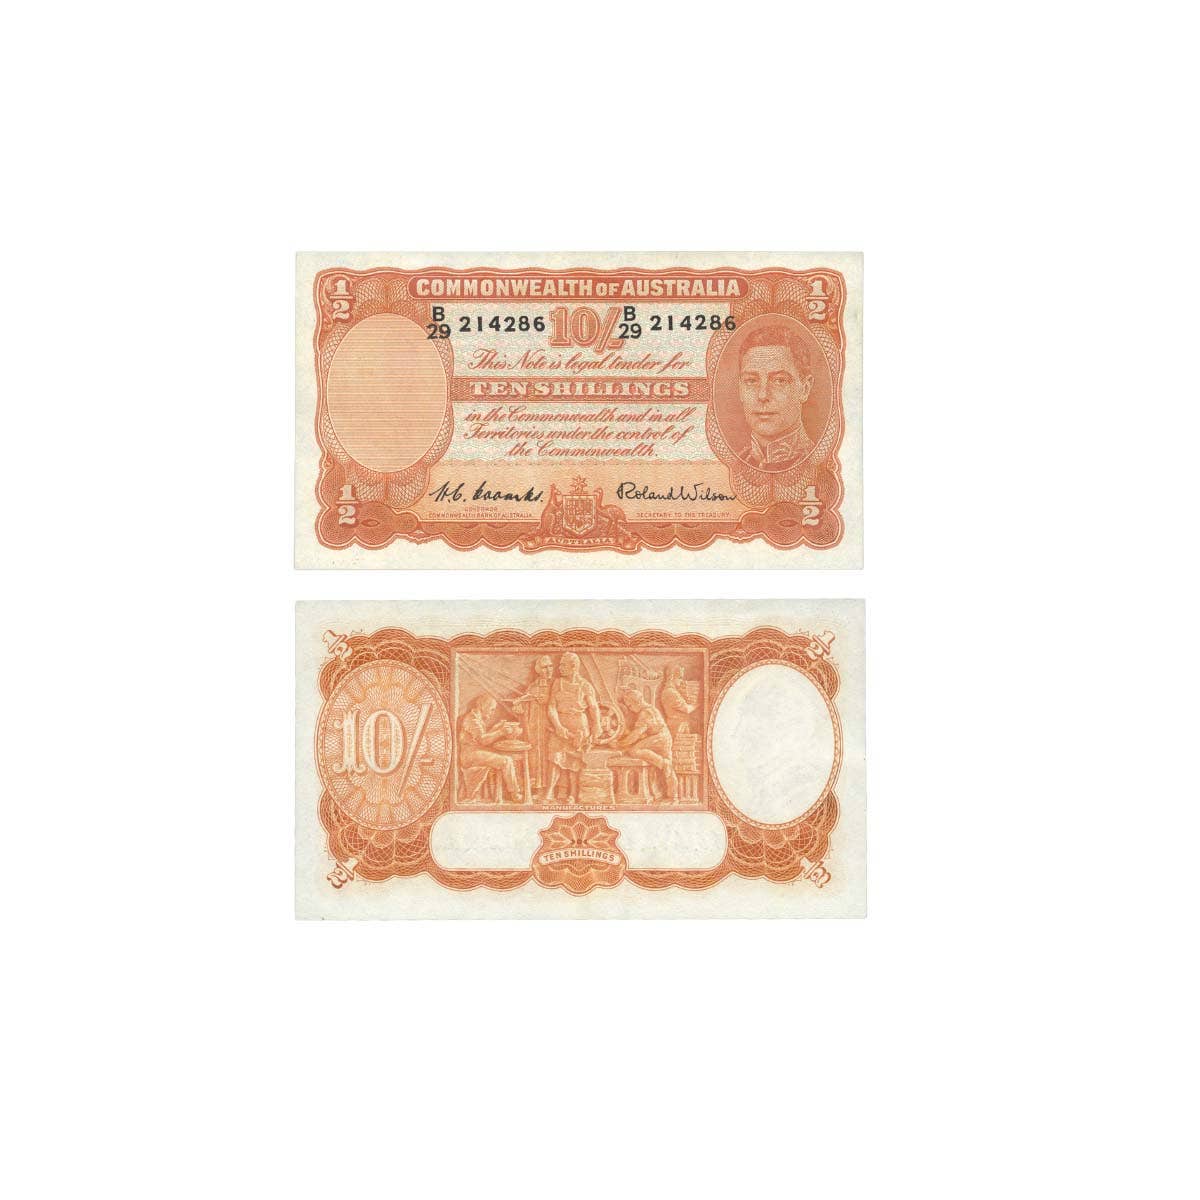 1952 10/- R15 Coombs/Wilson Banknote Uncirculated